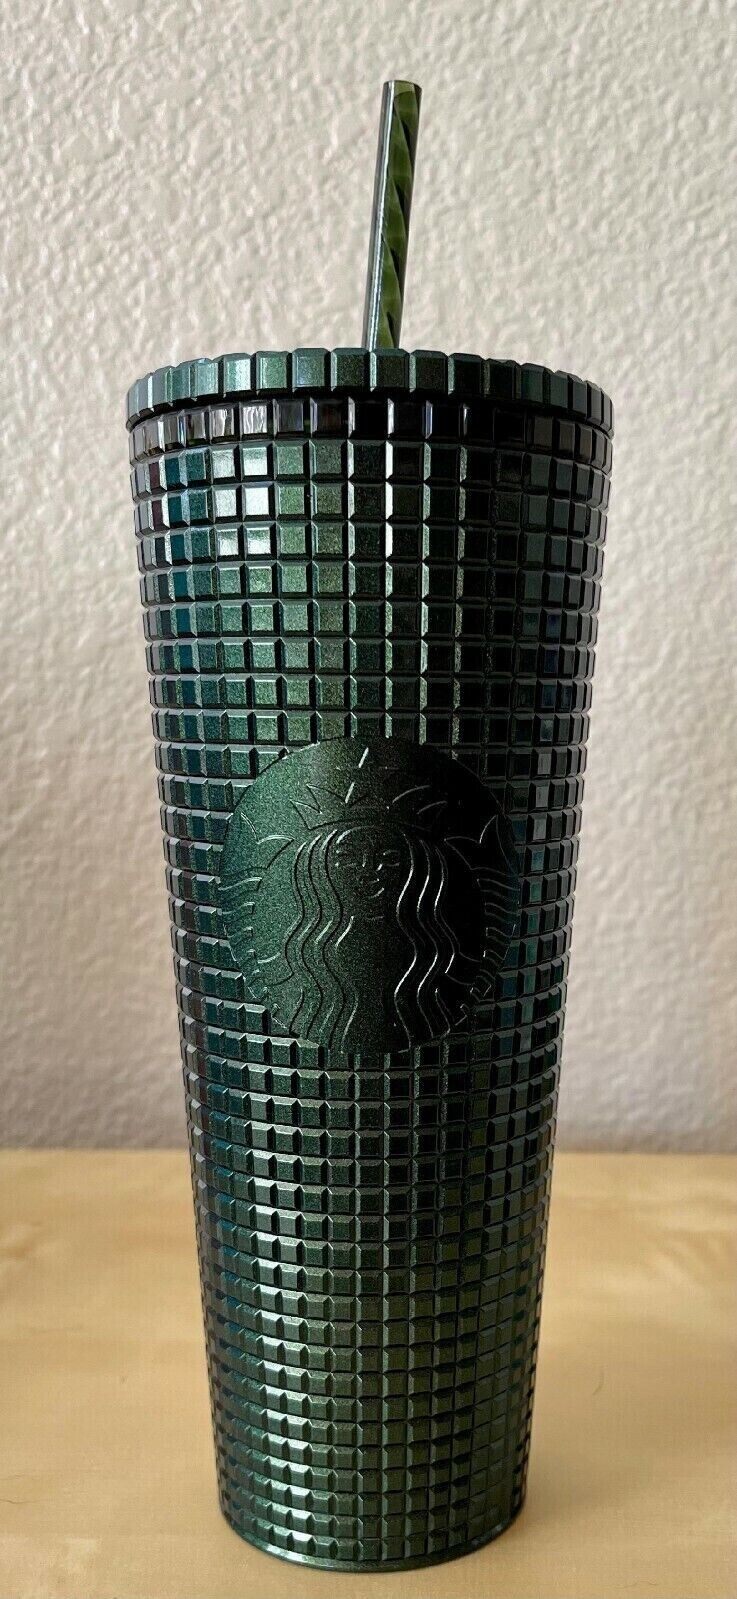 NEW - Starbucks - 2021 Winter / Holiday - Grid Cold Cup Tumbler - Venti - Green